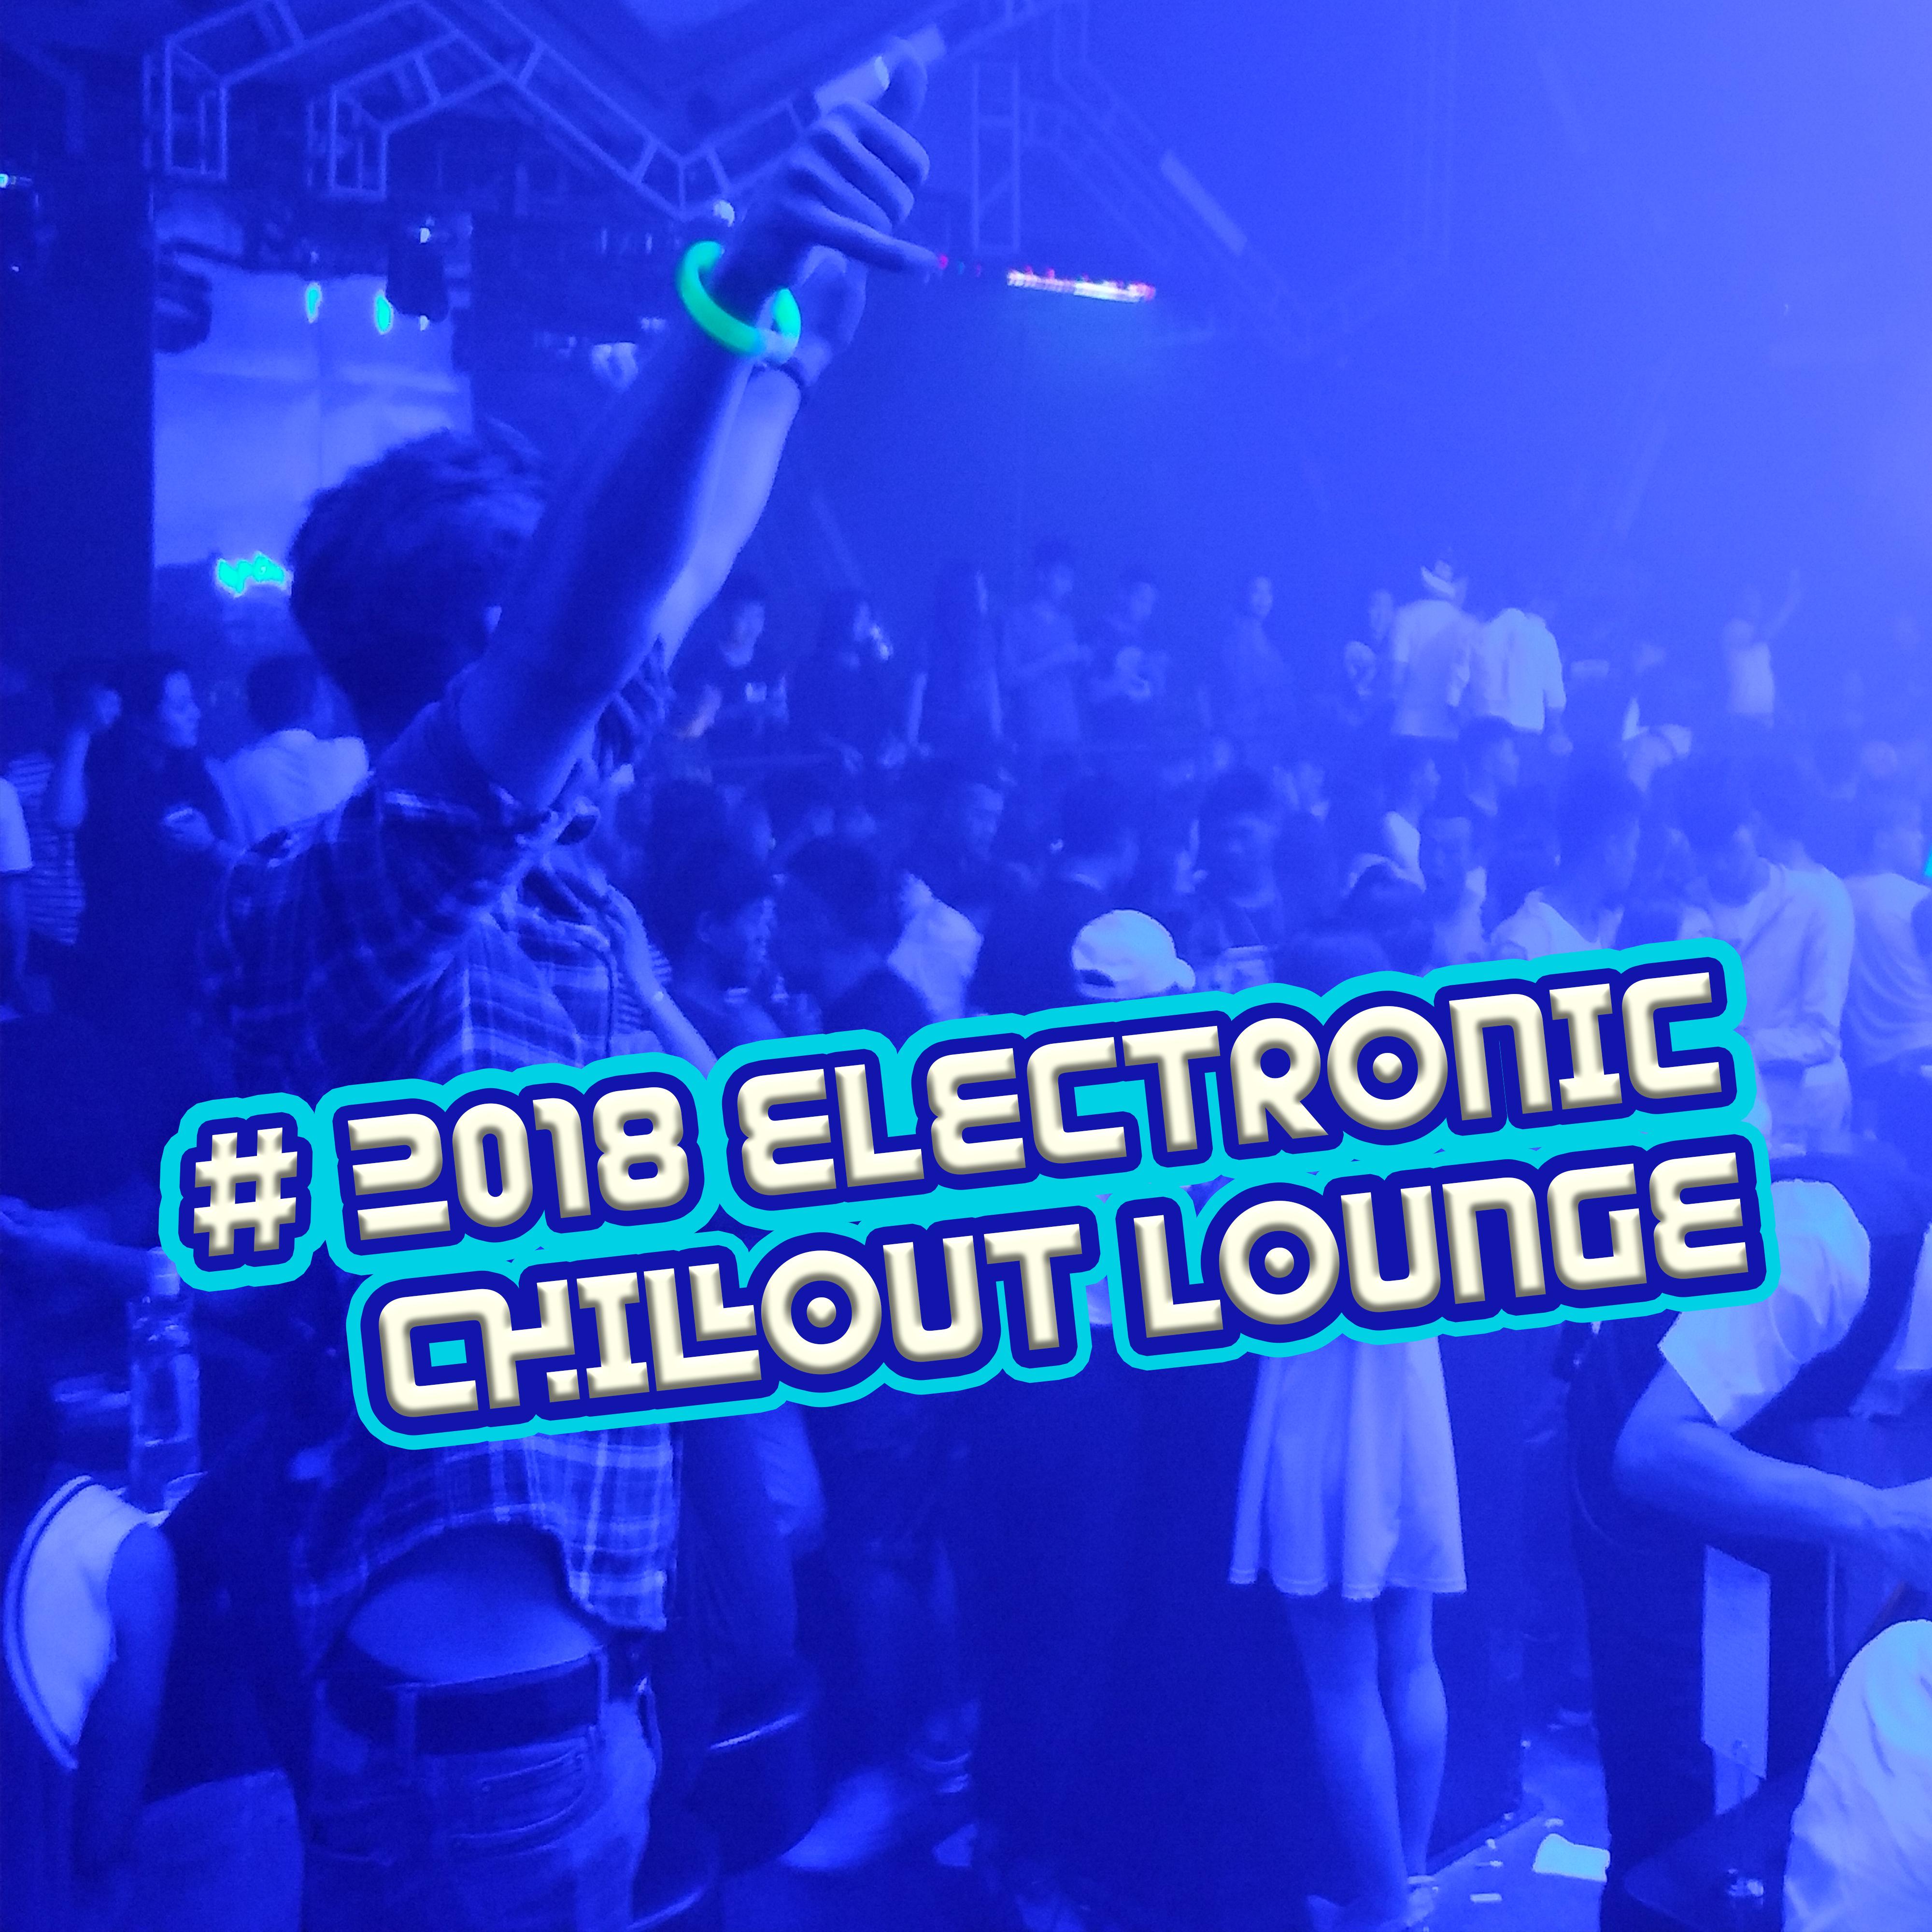 # 2018 Electronic Chillout Lounge